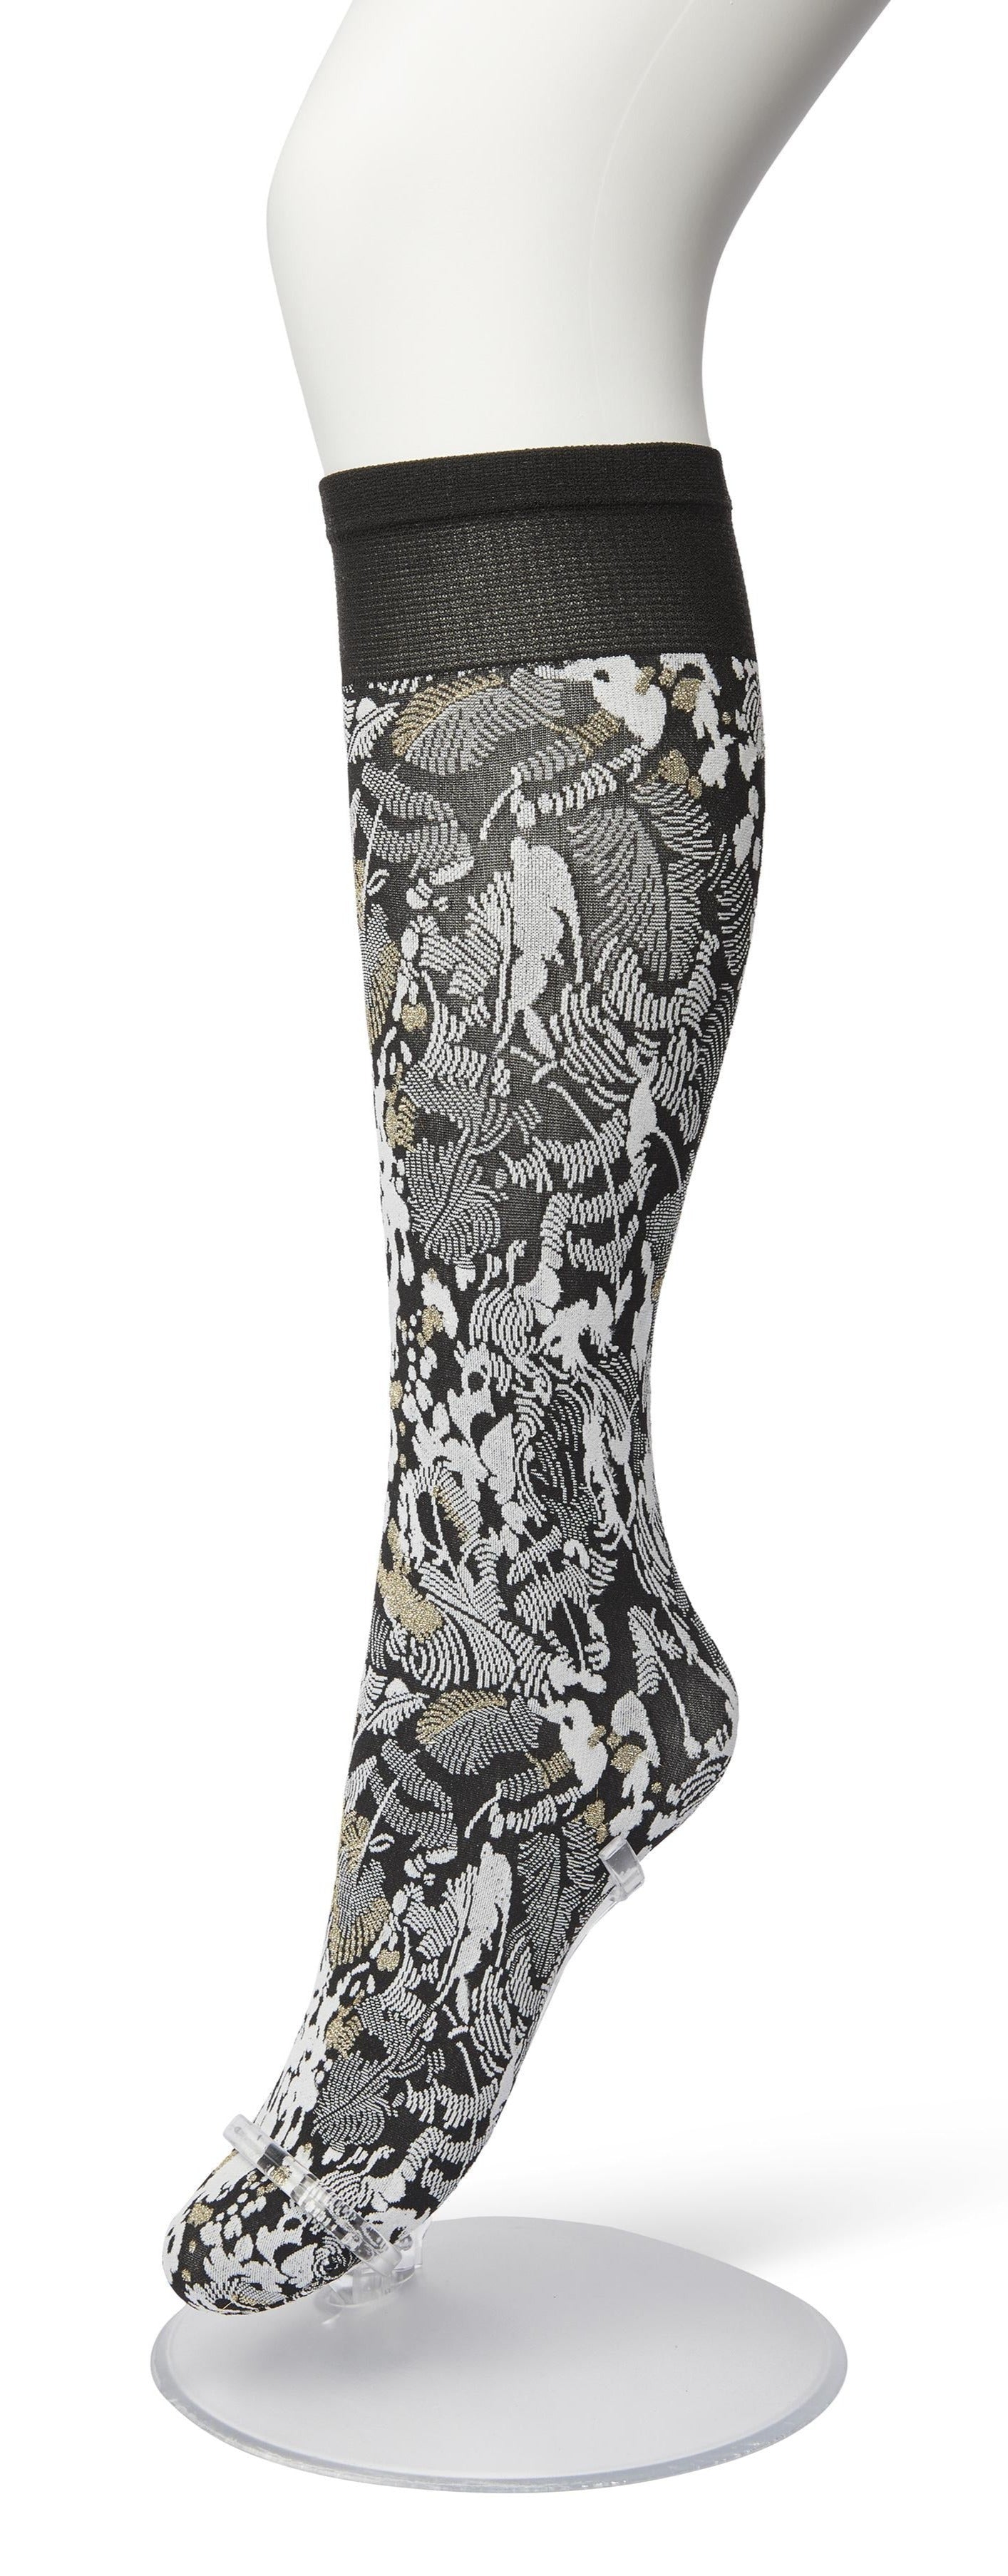 Bonnie Doon Botanical Lurex Knee-highs - White soft matte opaque fashion knee-high socks with a woven leaf style pattern in black and sparkly metallic gold and deep black comfort cuff.